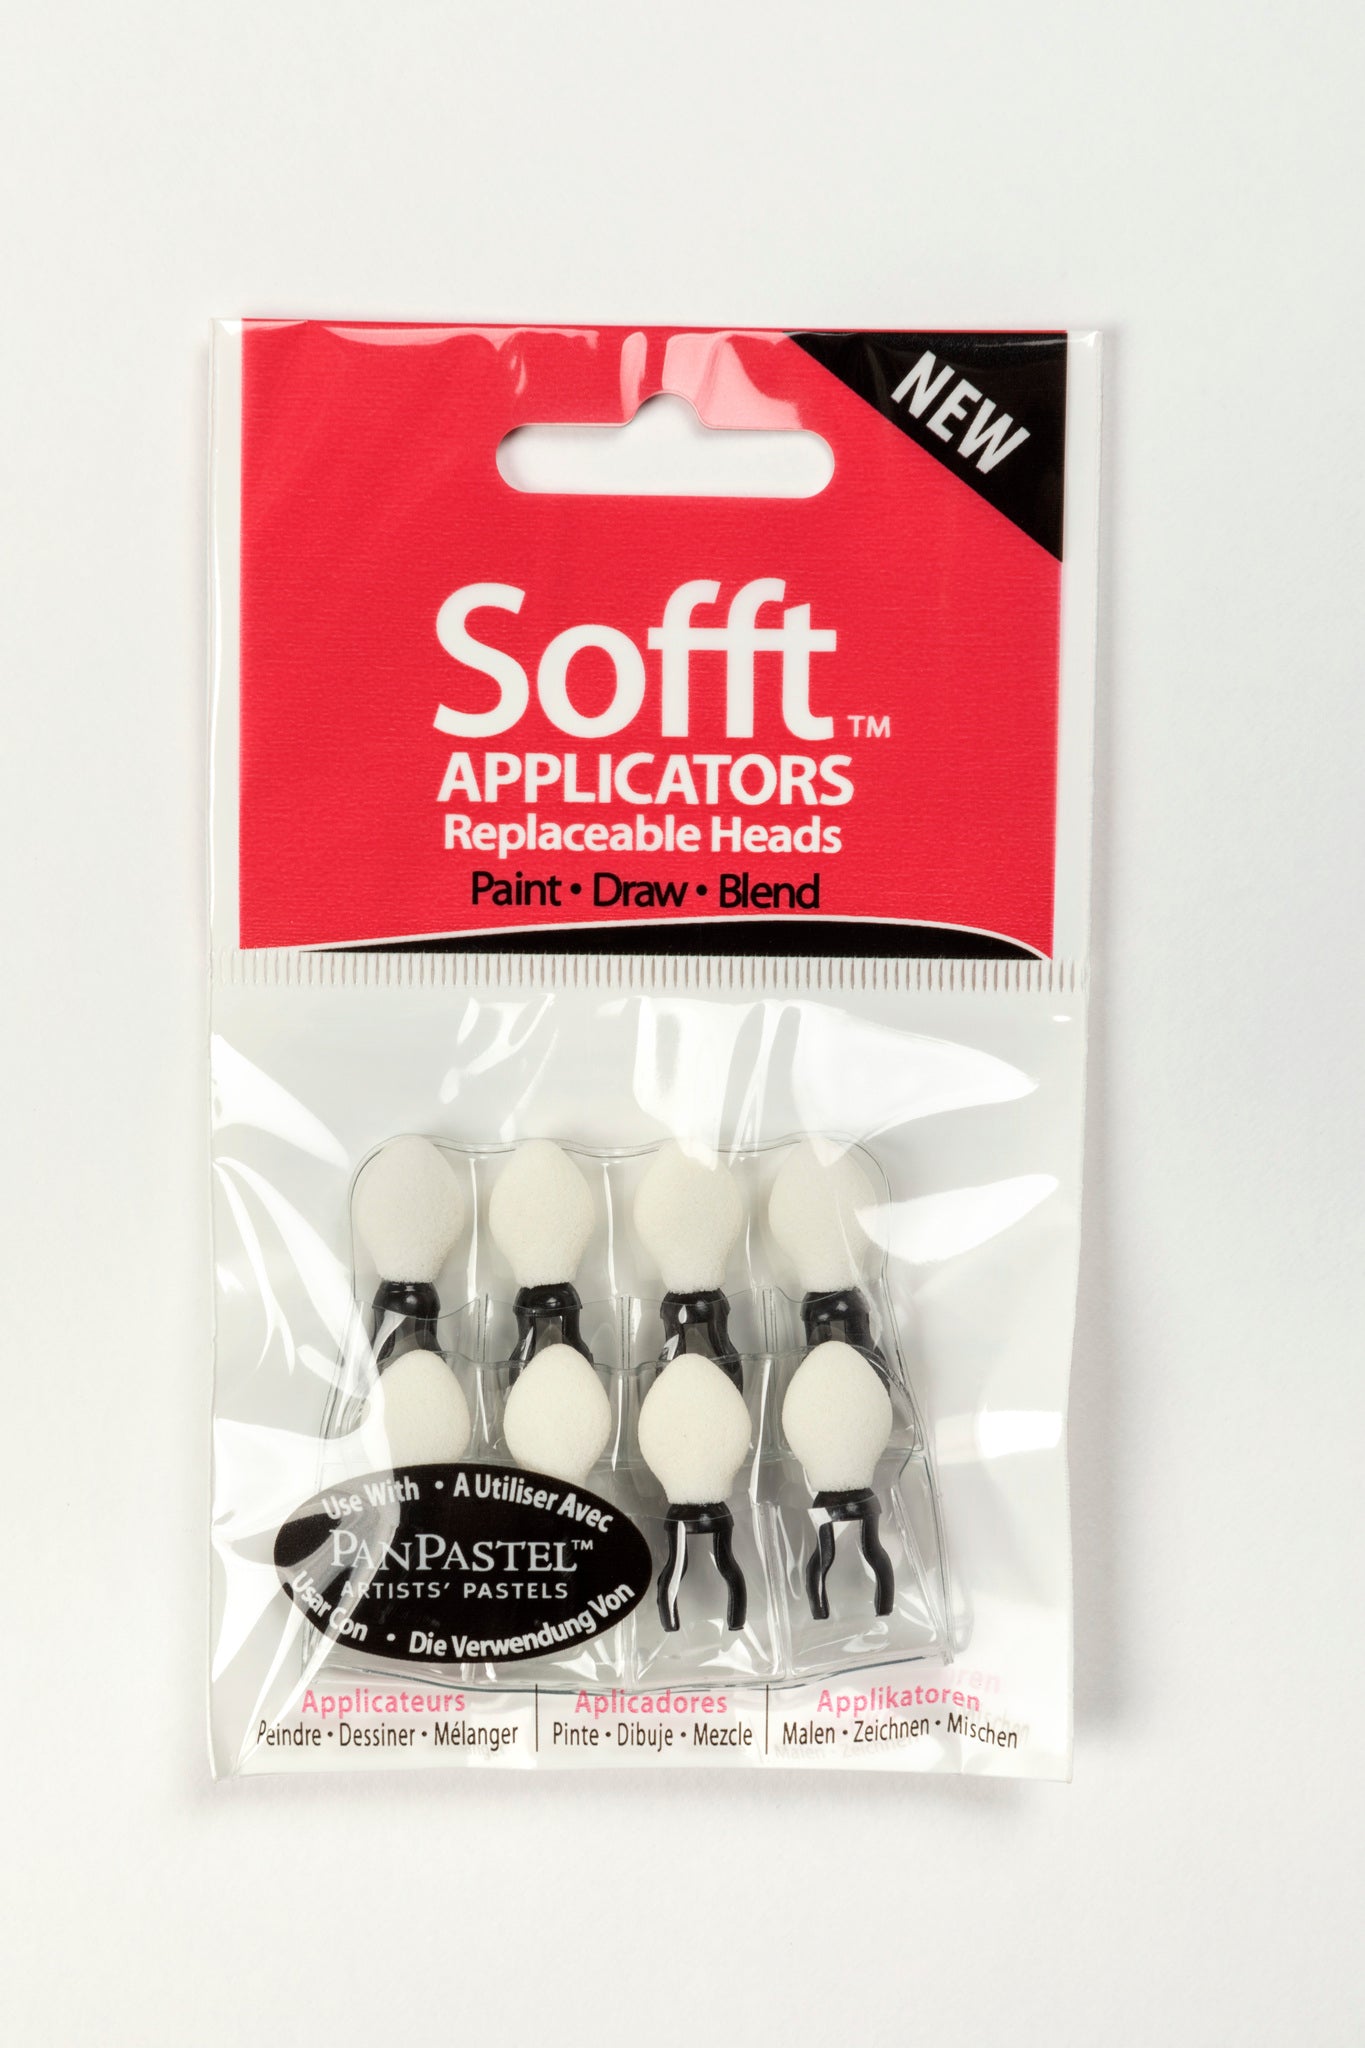 PanPastel Sofft tools Soft Applicator 63071 - Applicator Replacement Heads x 8